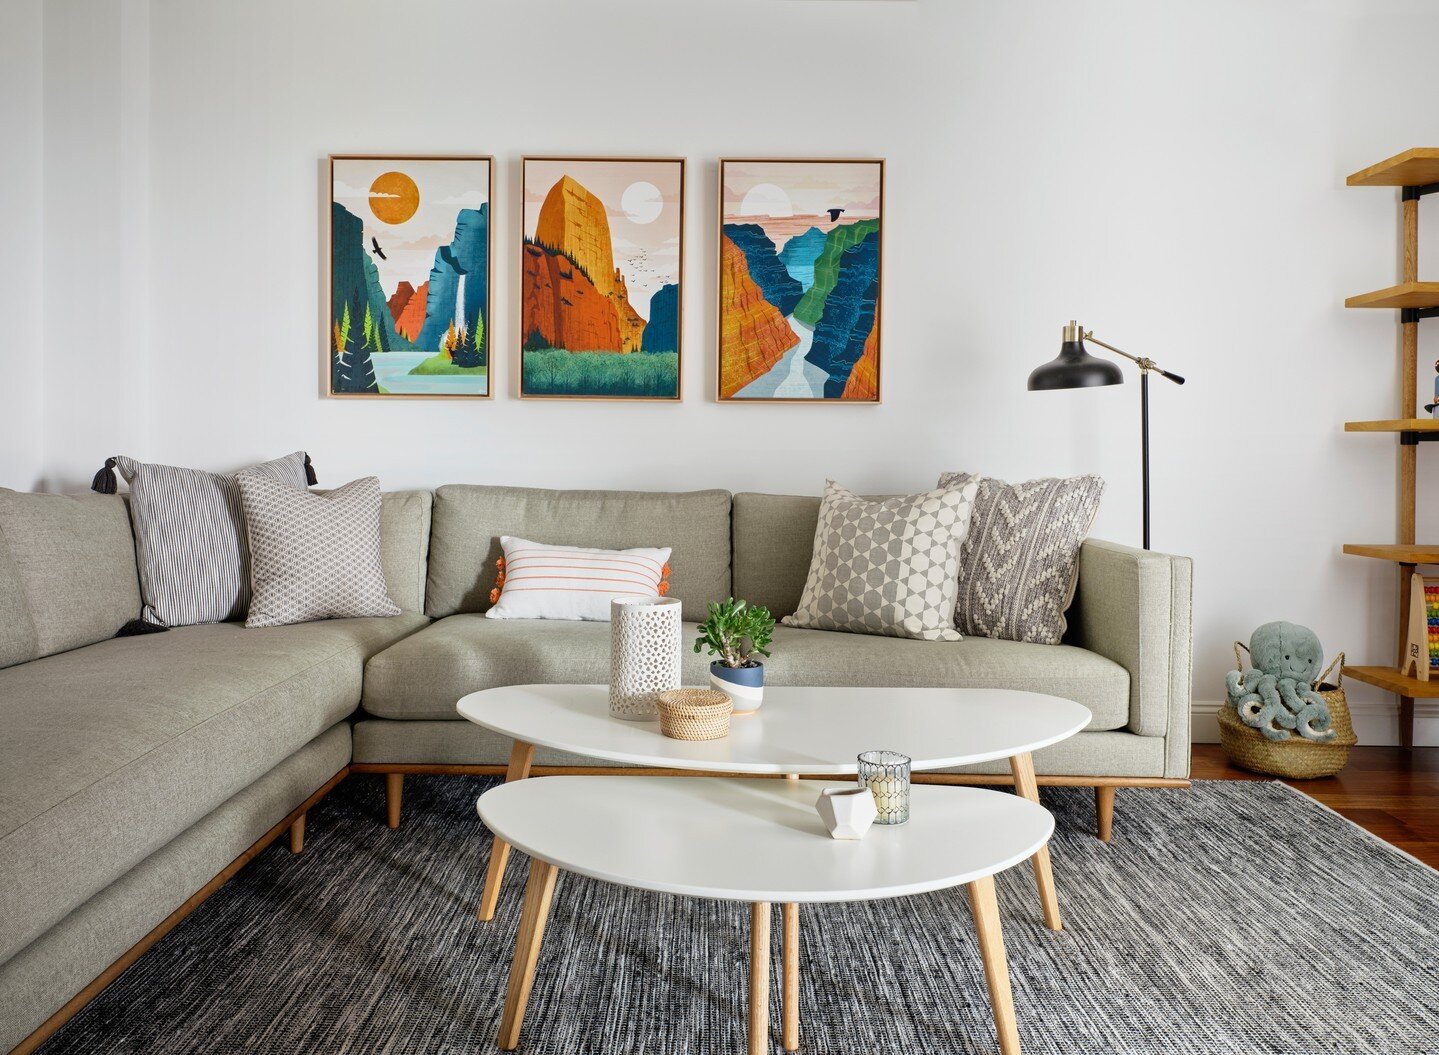 We love the striking contrast of this bold and colorful triptych of our client&rsquo;s favorite National Parks by @laura_aimss via @etsy in our otherwise neutral #NoeValleyViewsForDays living area.⁠
⁠
Photography Credit: @rbradleyphoto